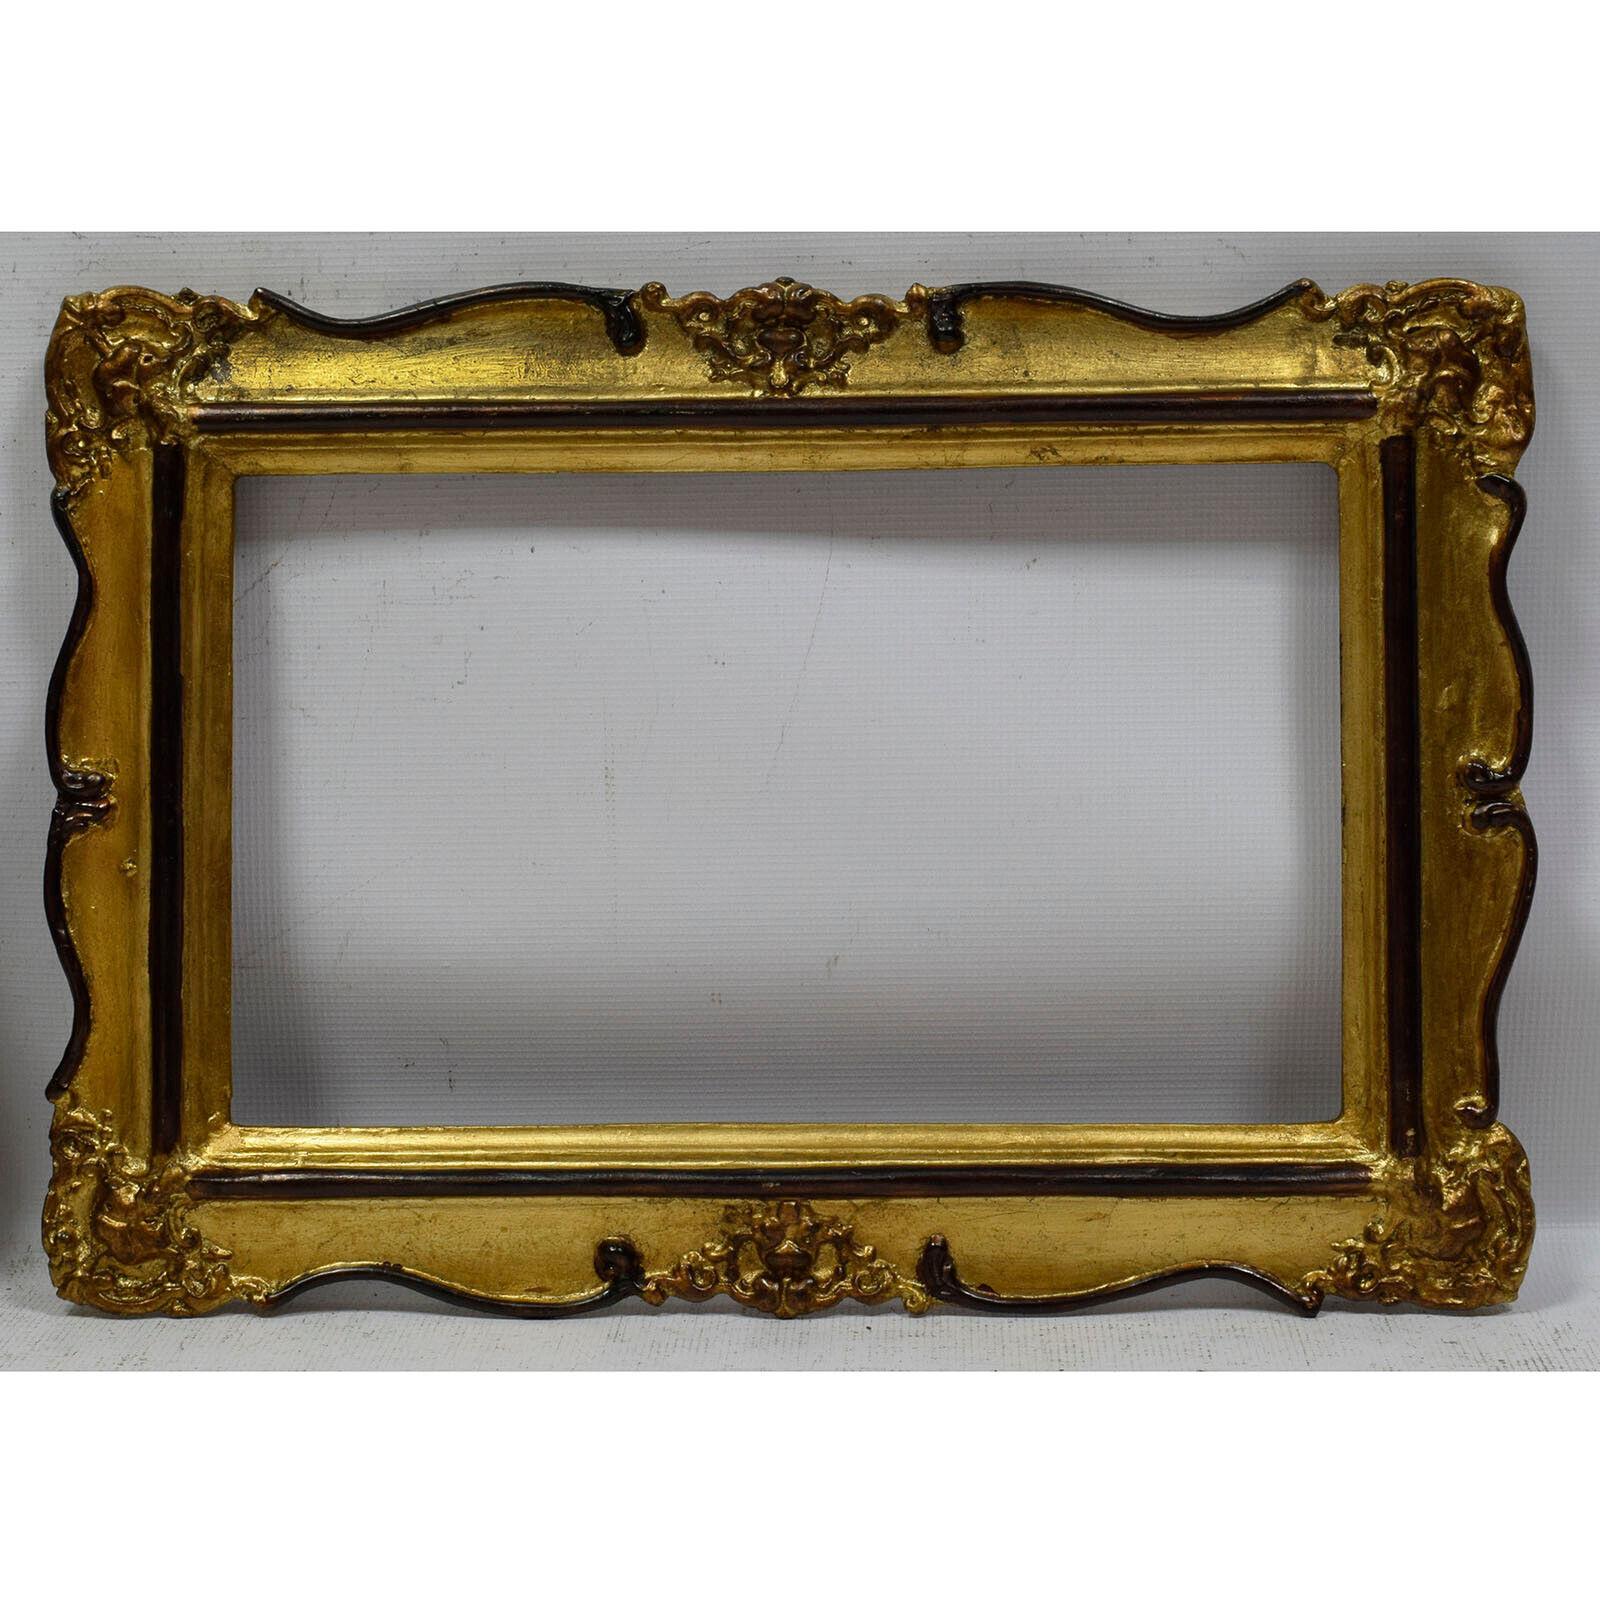 Ca.1930-1940 Old wooden frame decorative with metal leaf Internal: 17,1x10,6 in